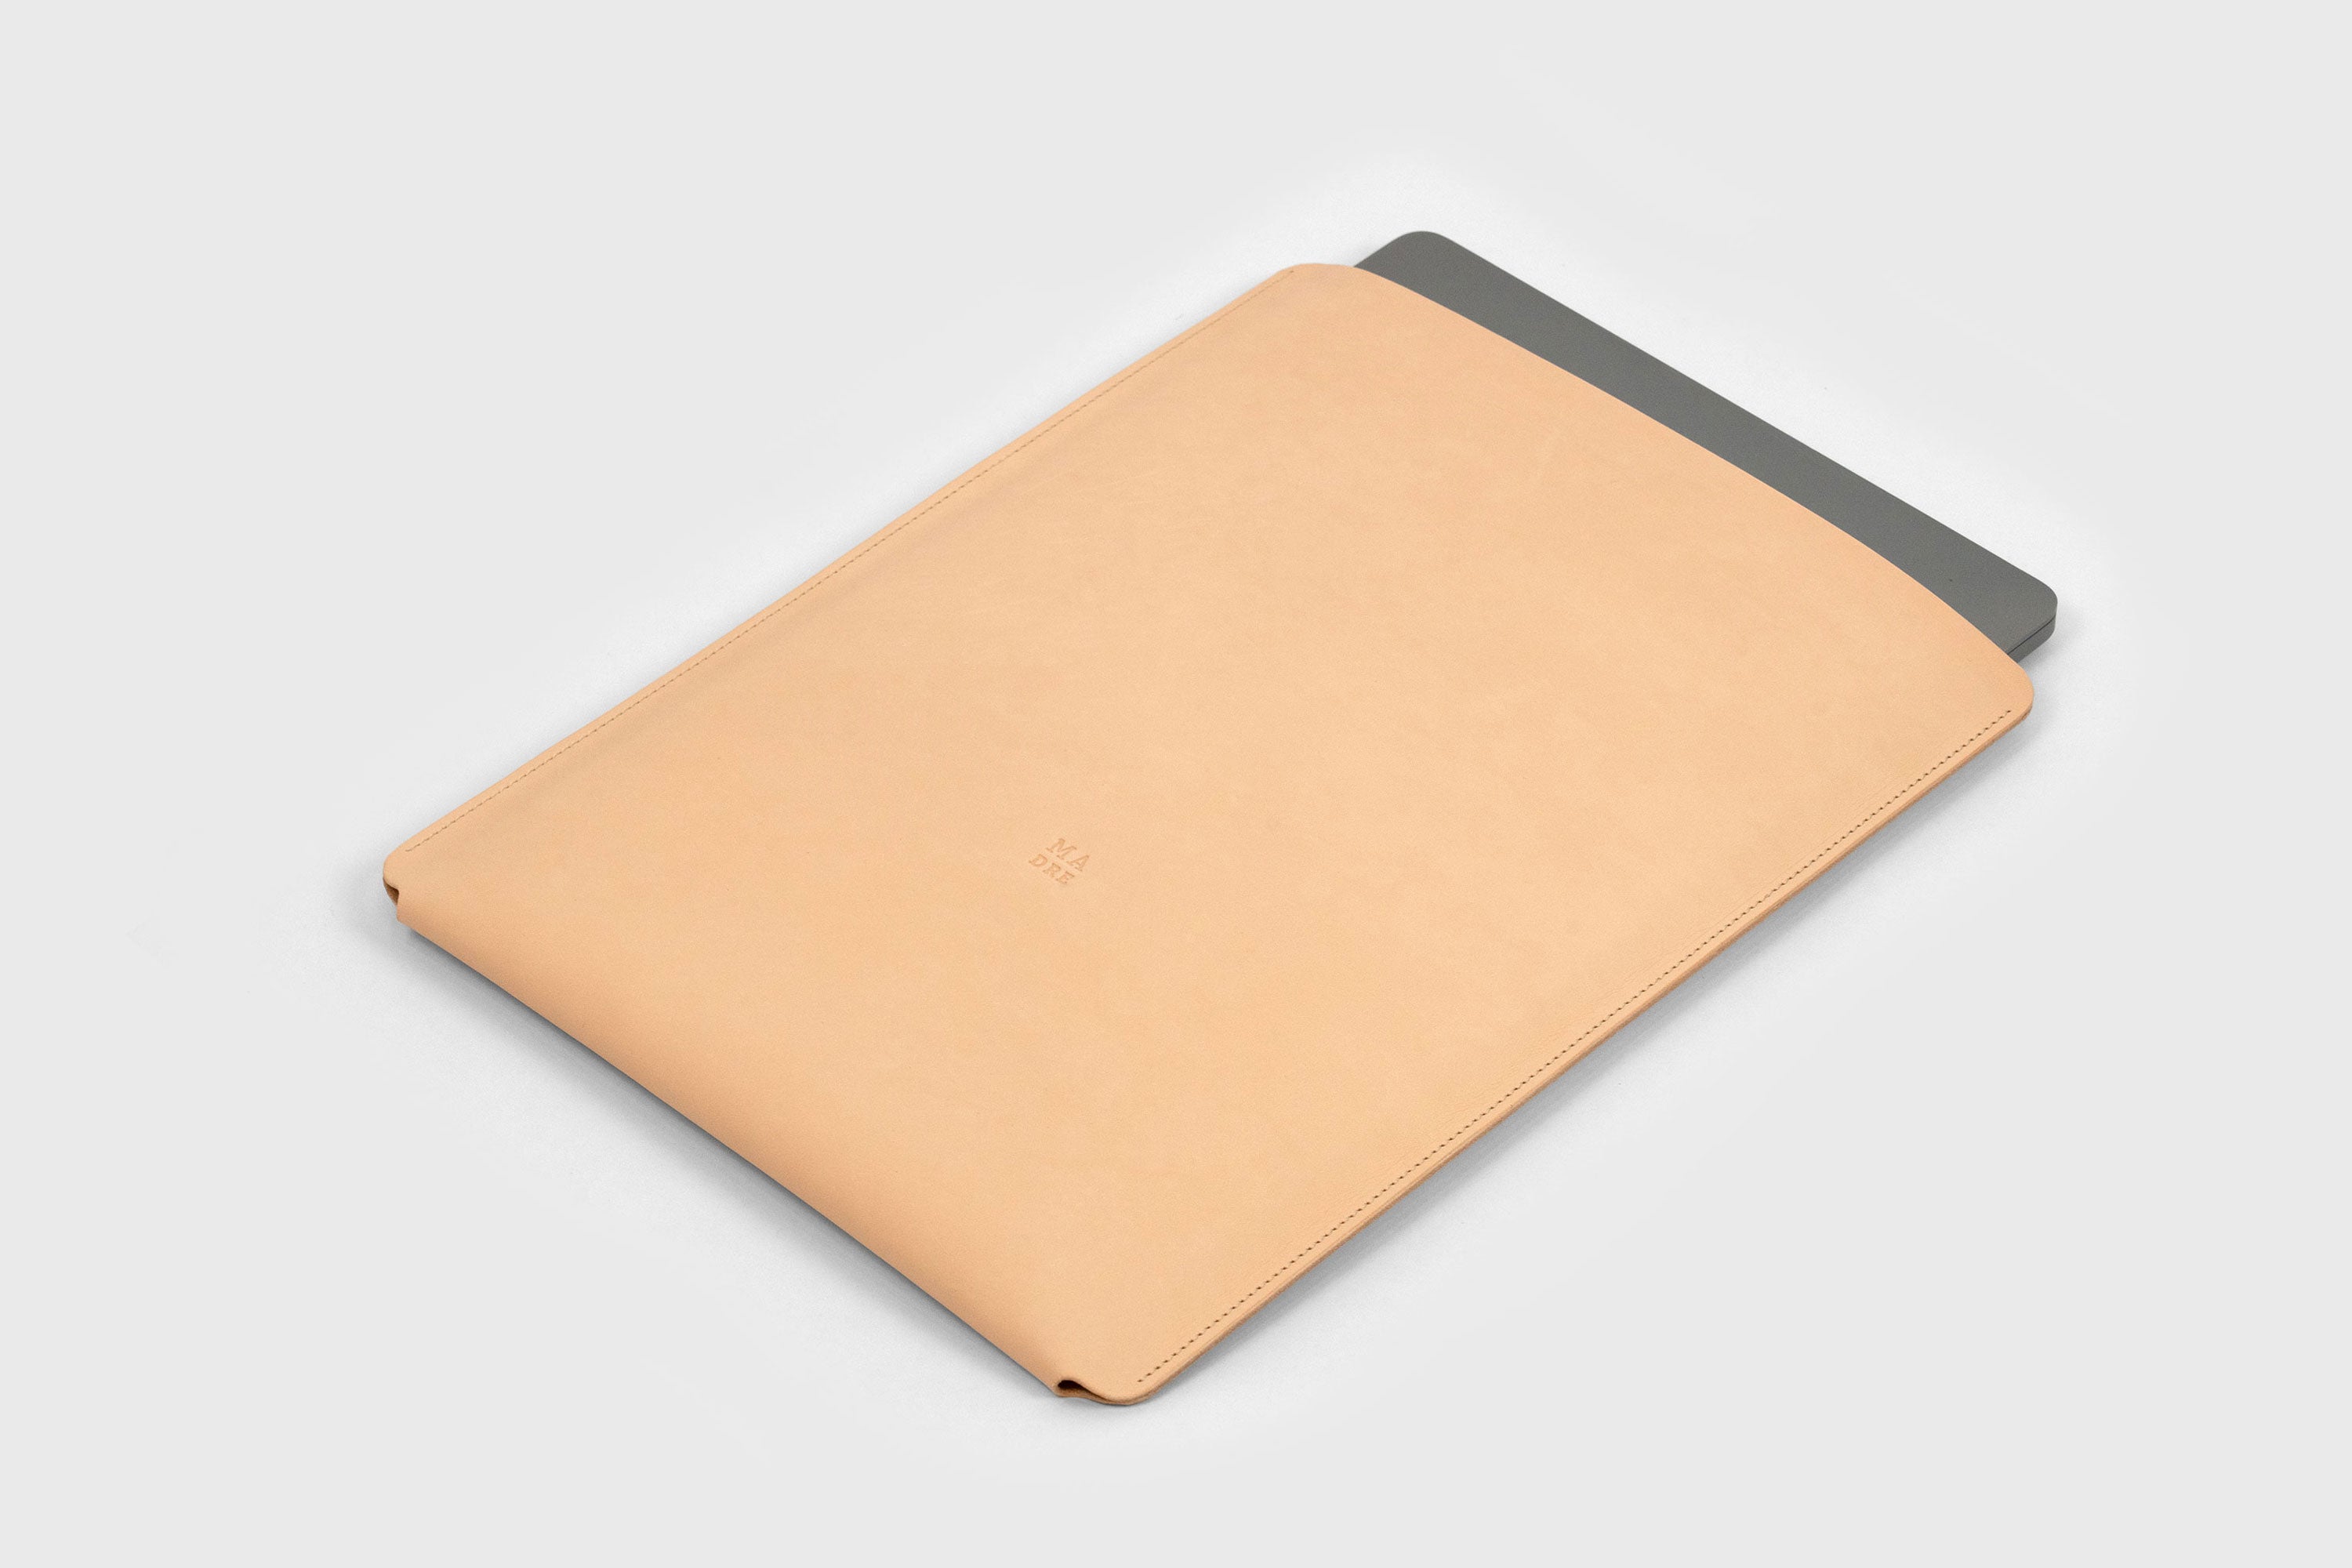 MacBook Air 15 Inch Sleeve Leather Natural Colour Minimalistic Design Premium Quality By Atelier Madre Manuel Dreesmann Atelier Madre Barcelona Spain